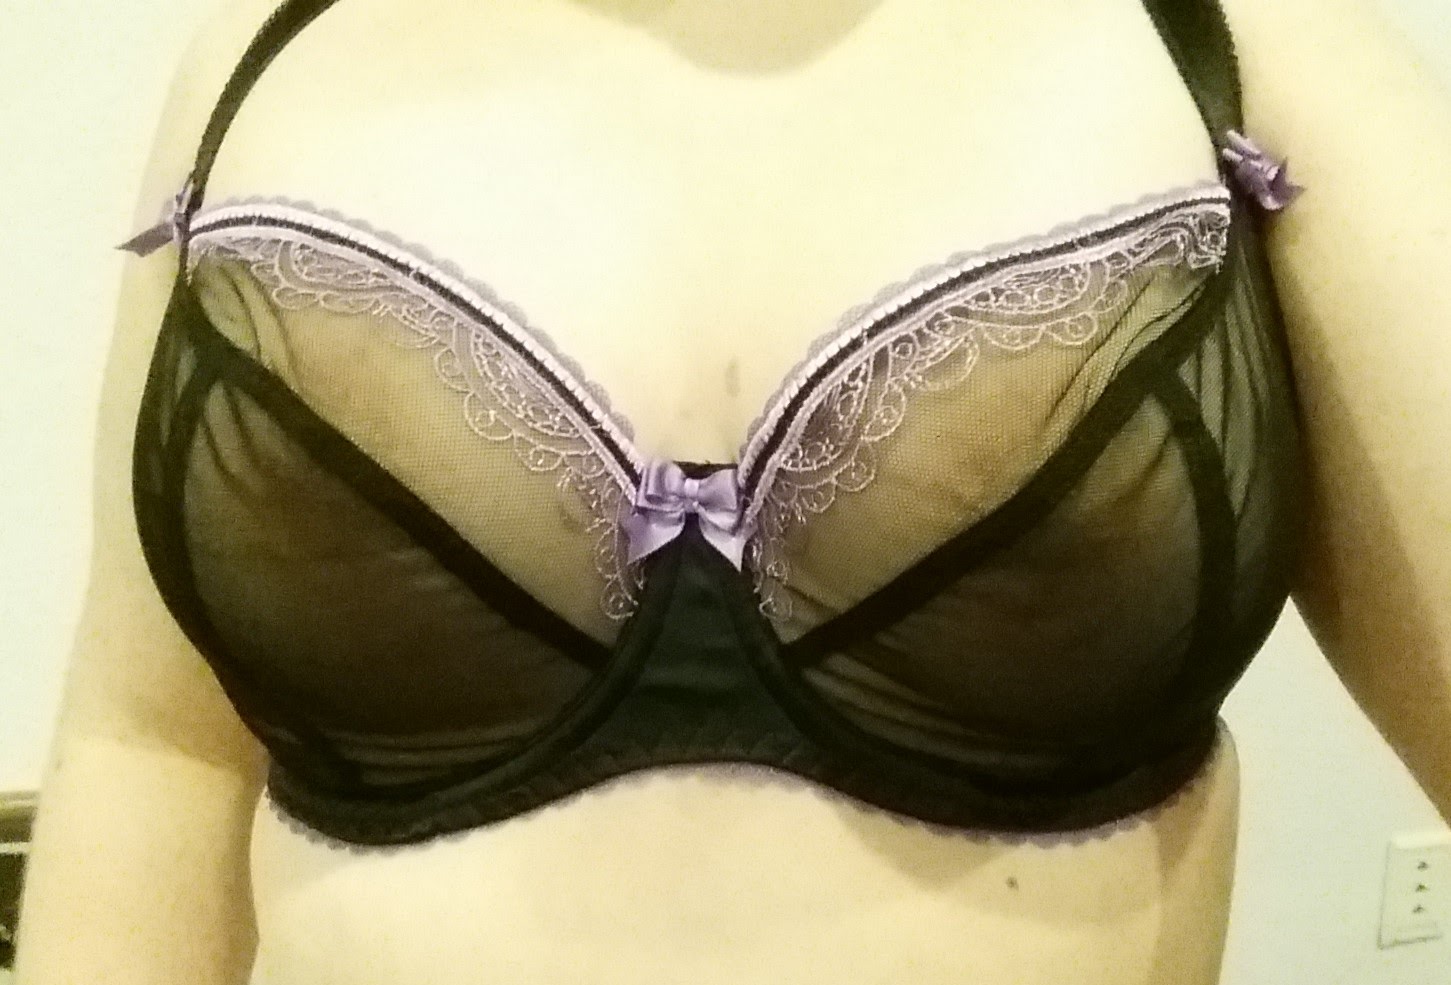 Bra Science - 16 Signs You're Wearing a Parachute Bra